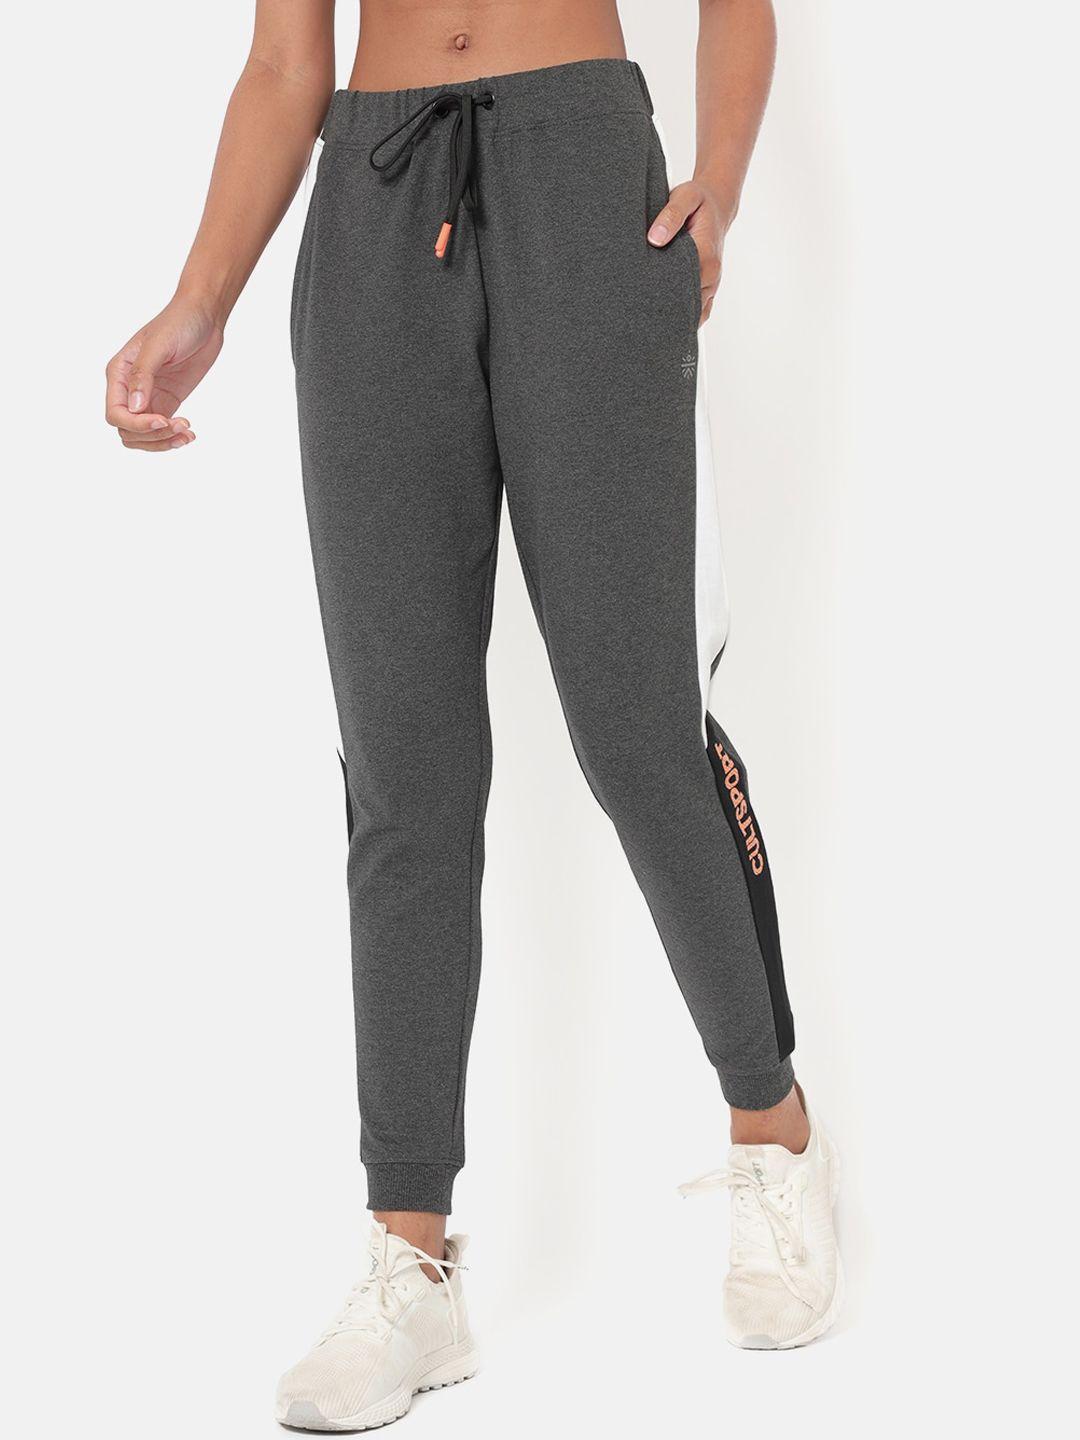 cultsport-women-grey-melange-solid-antimicrobial-joggers